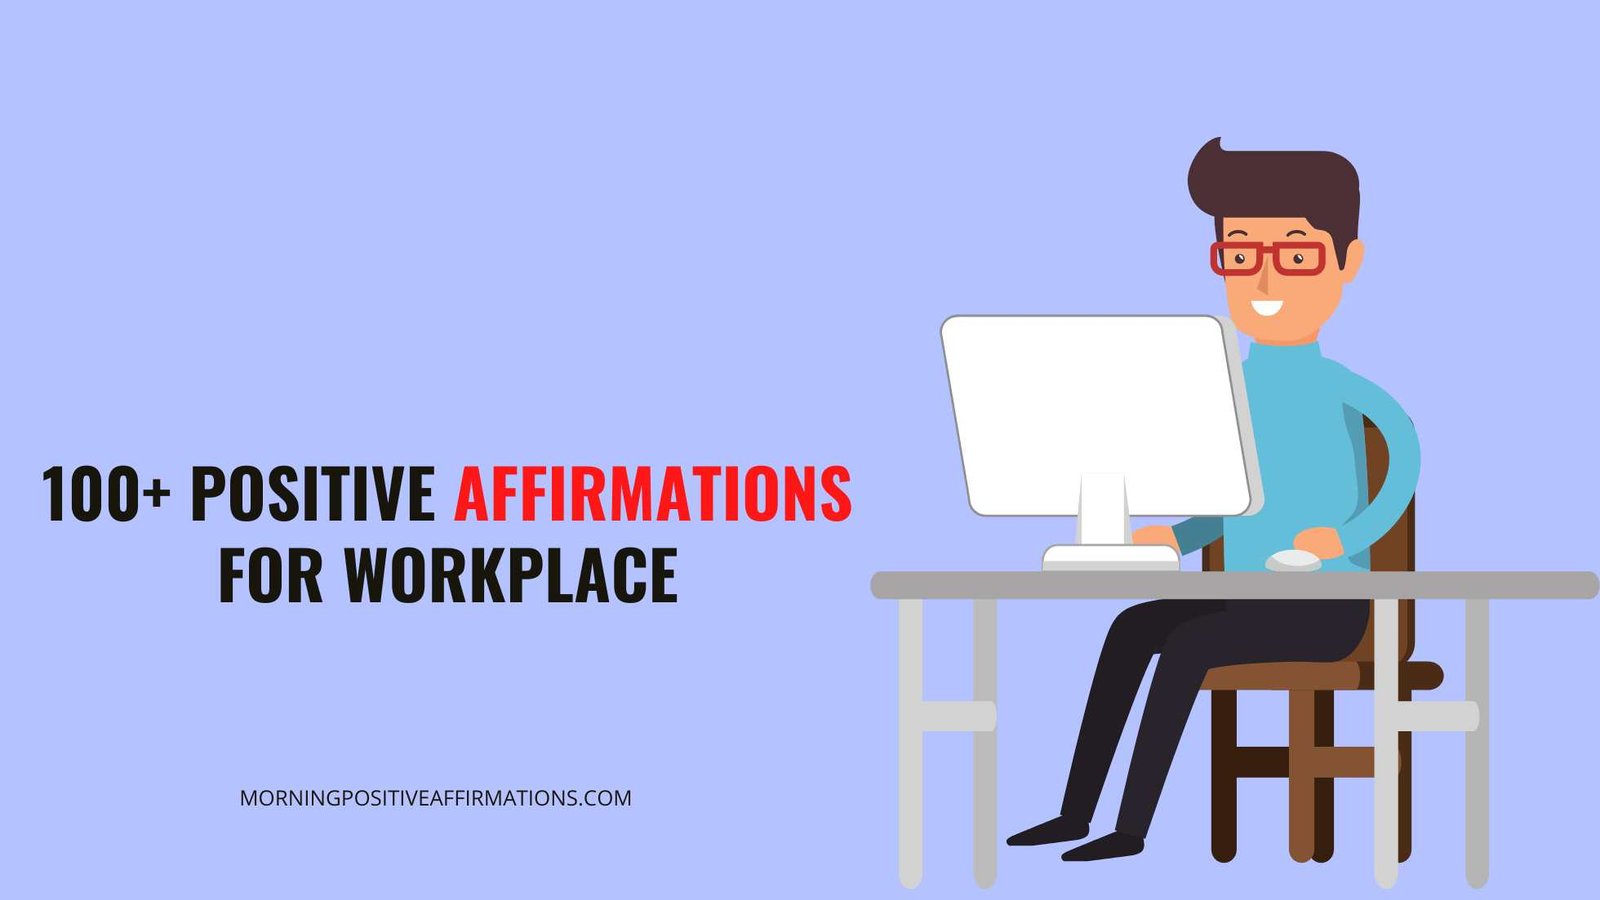 Positive Affirmations For Workplace